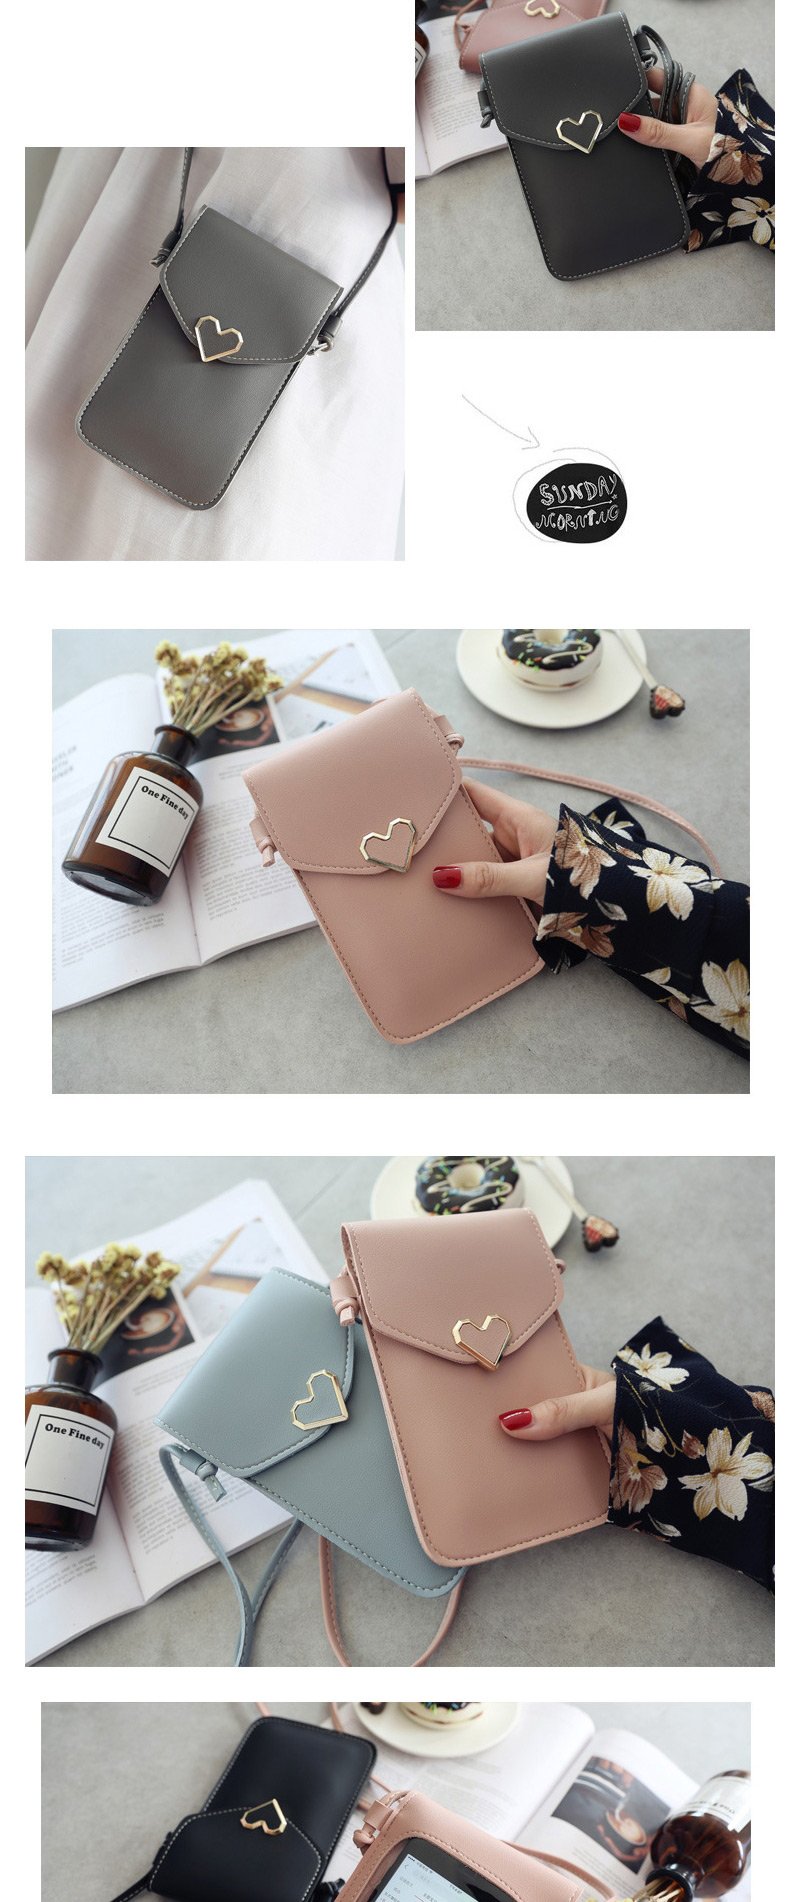 Fashion Light Pink Caring Metal Transparent Touch Screen Multifunctional Mobile Phone Bag,Shoulder bags